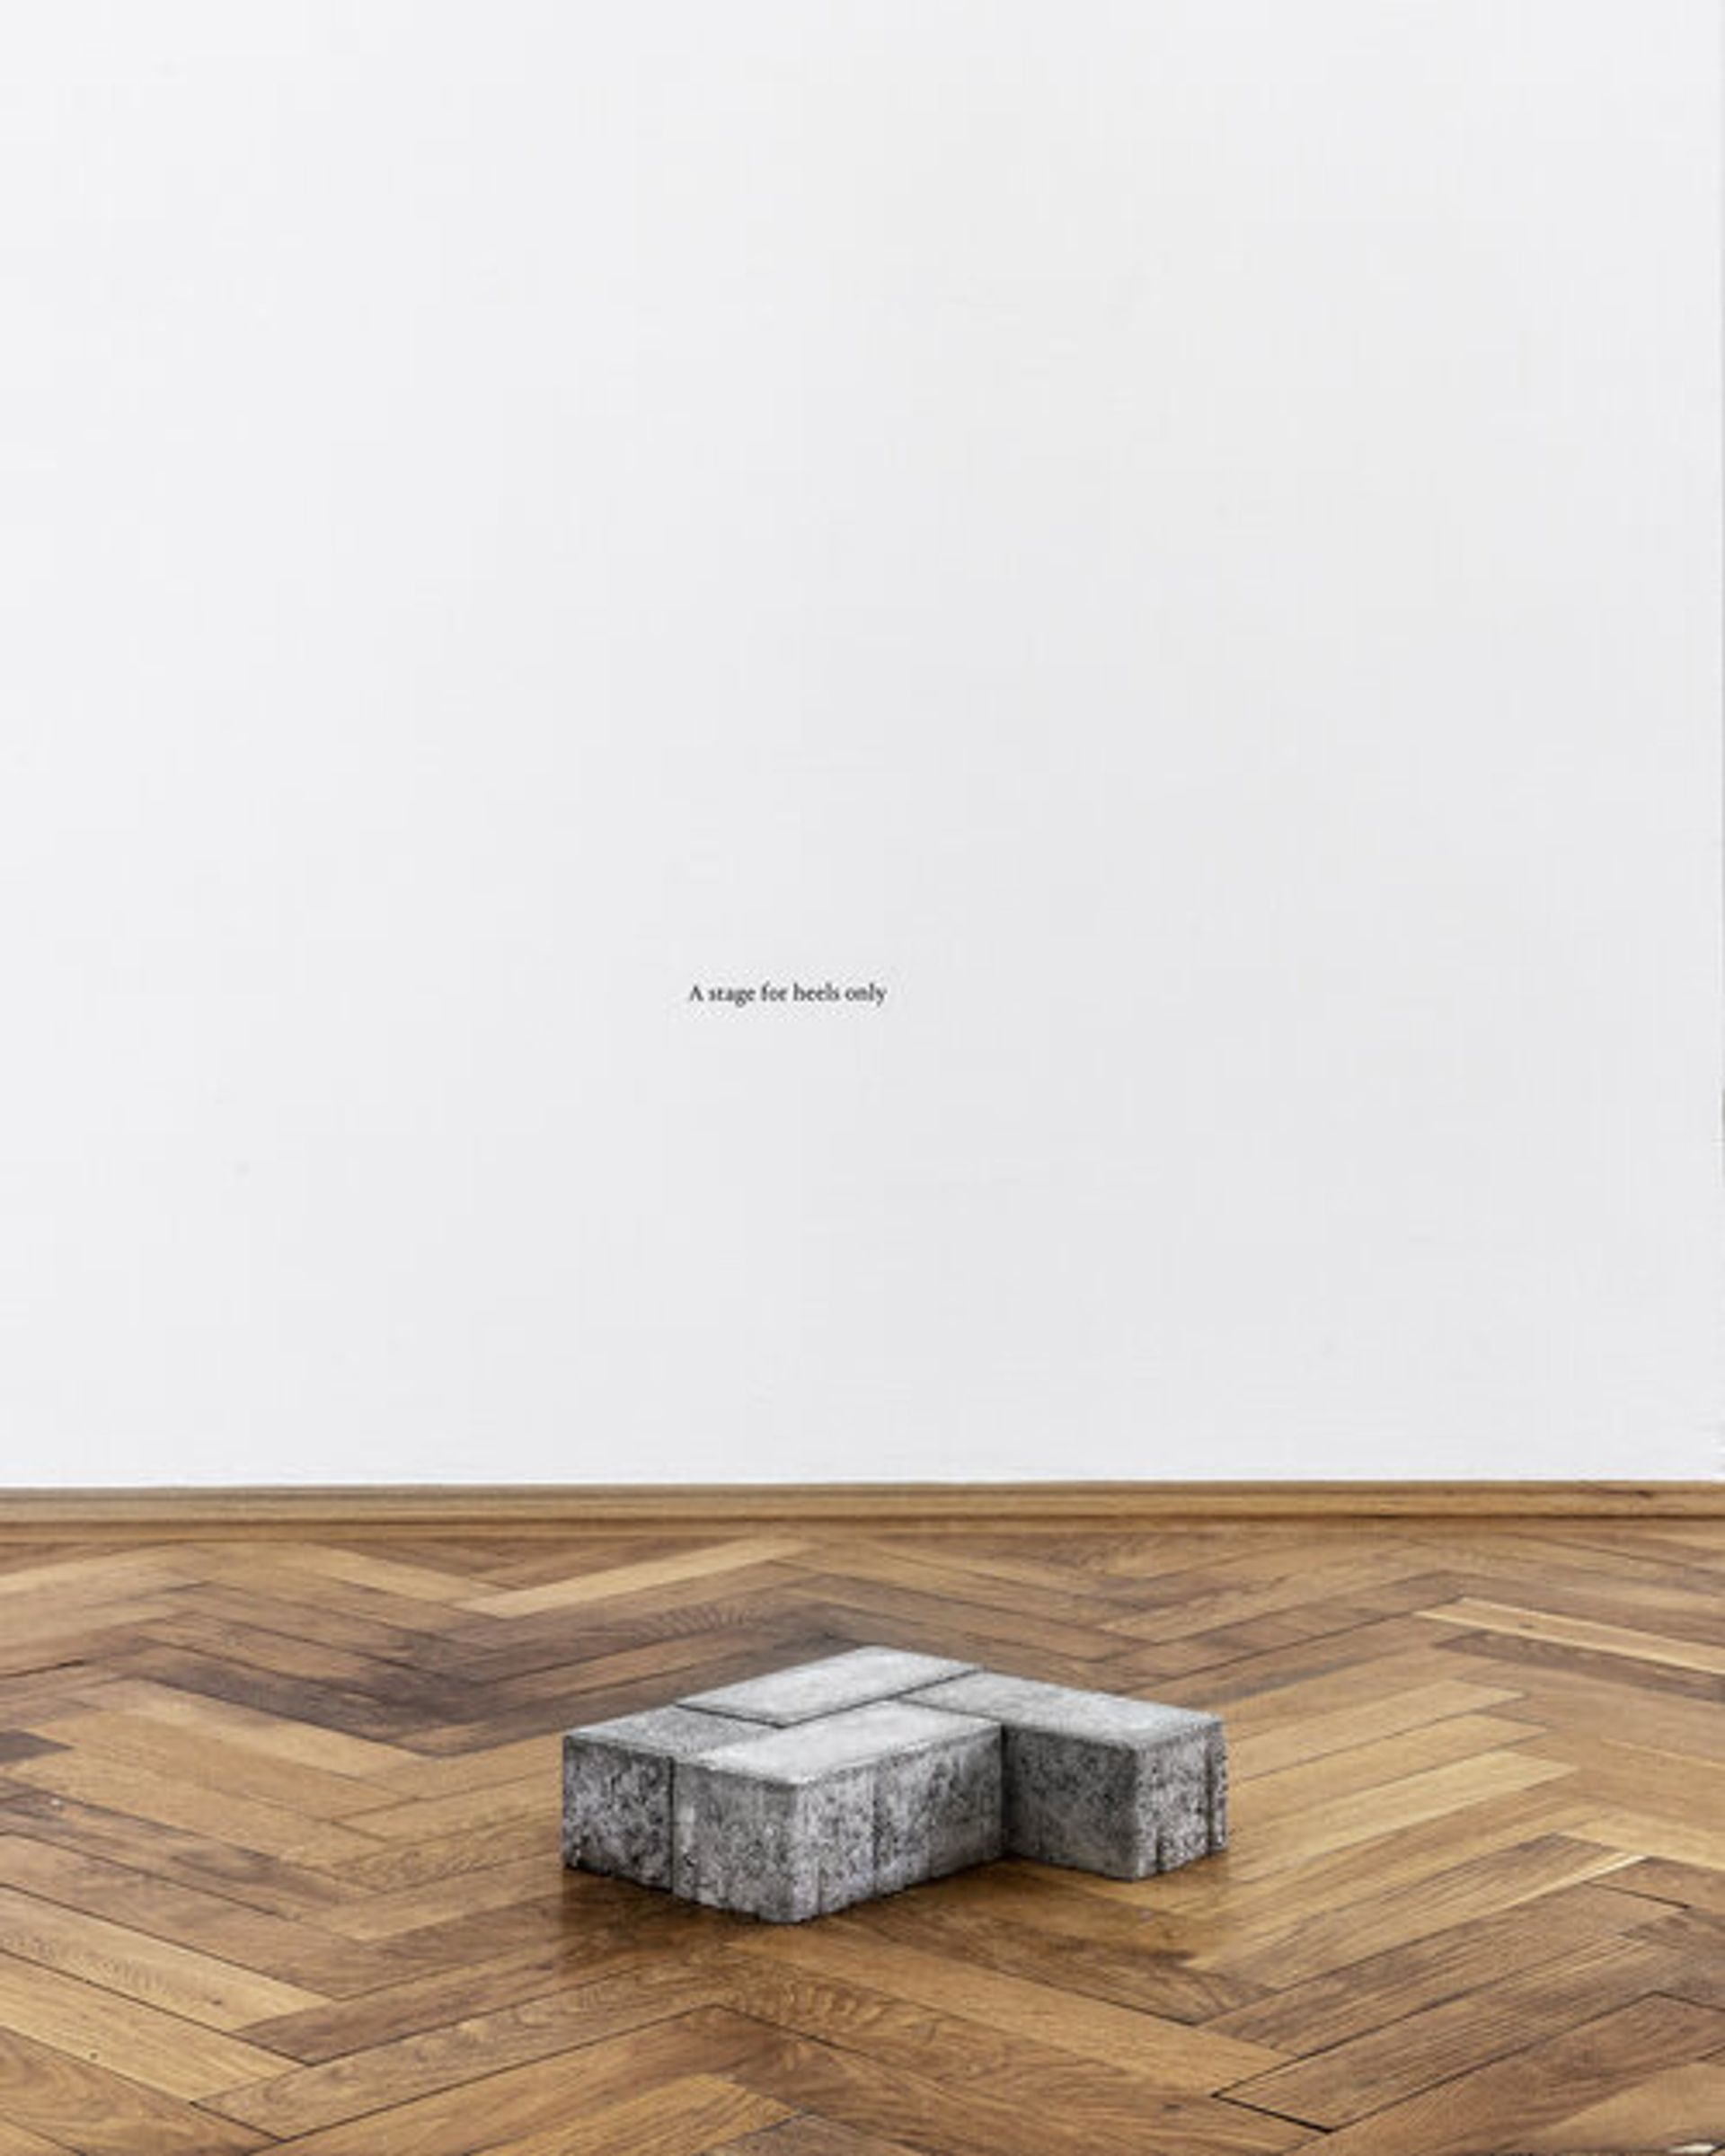 Private Monuments (A stage for heels only), 2017
concrete pavement tiles, adhesive letters, 35,5 × 41,5 × 8 cm. Private Monuments is a series of eight sculptures based on holes of missing bricks on public squares. As a positive of the original holes, they create fragments of public space within a new environment. Eight dedications can be found as instructions to activate these Private Monuments with momentary gestures that are an echo of the daily life on public squares.